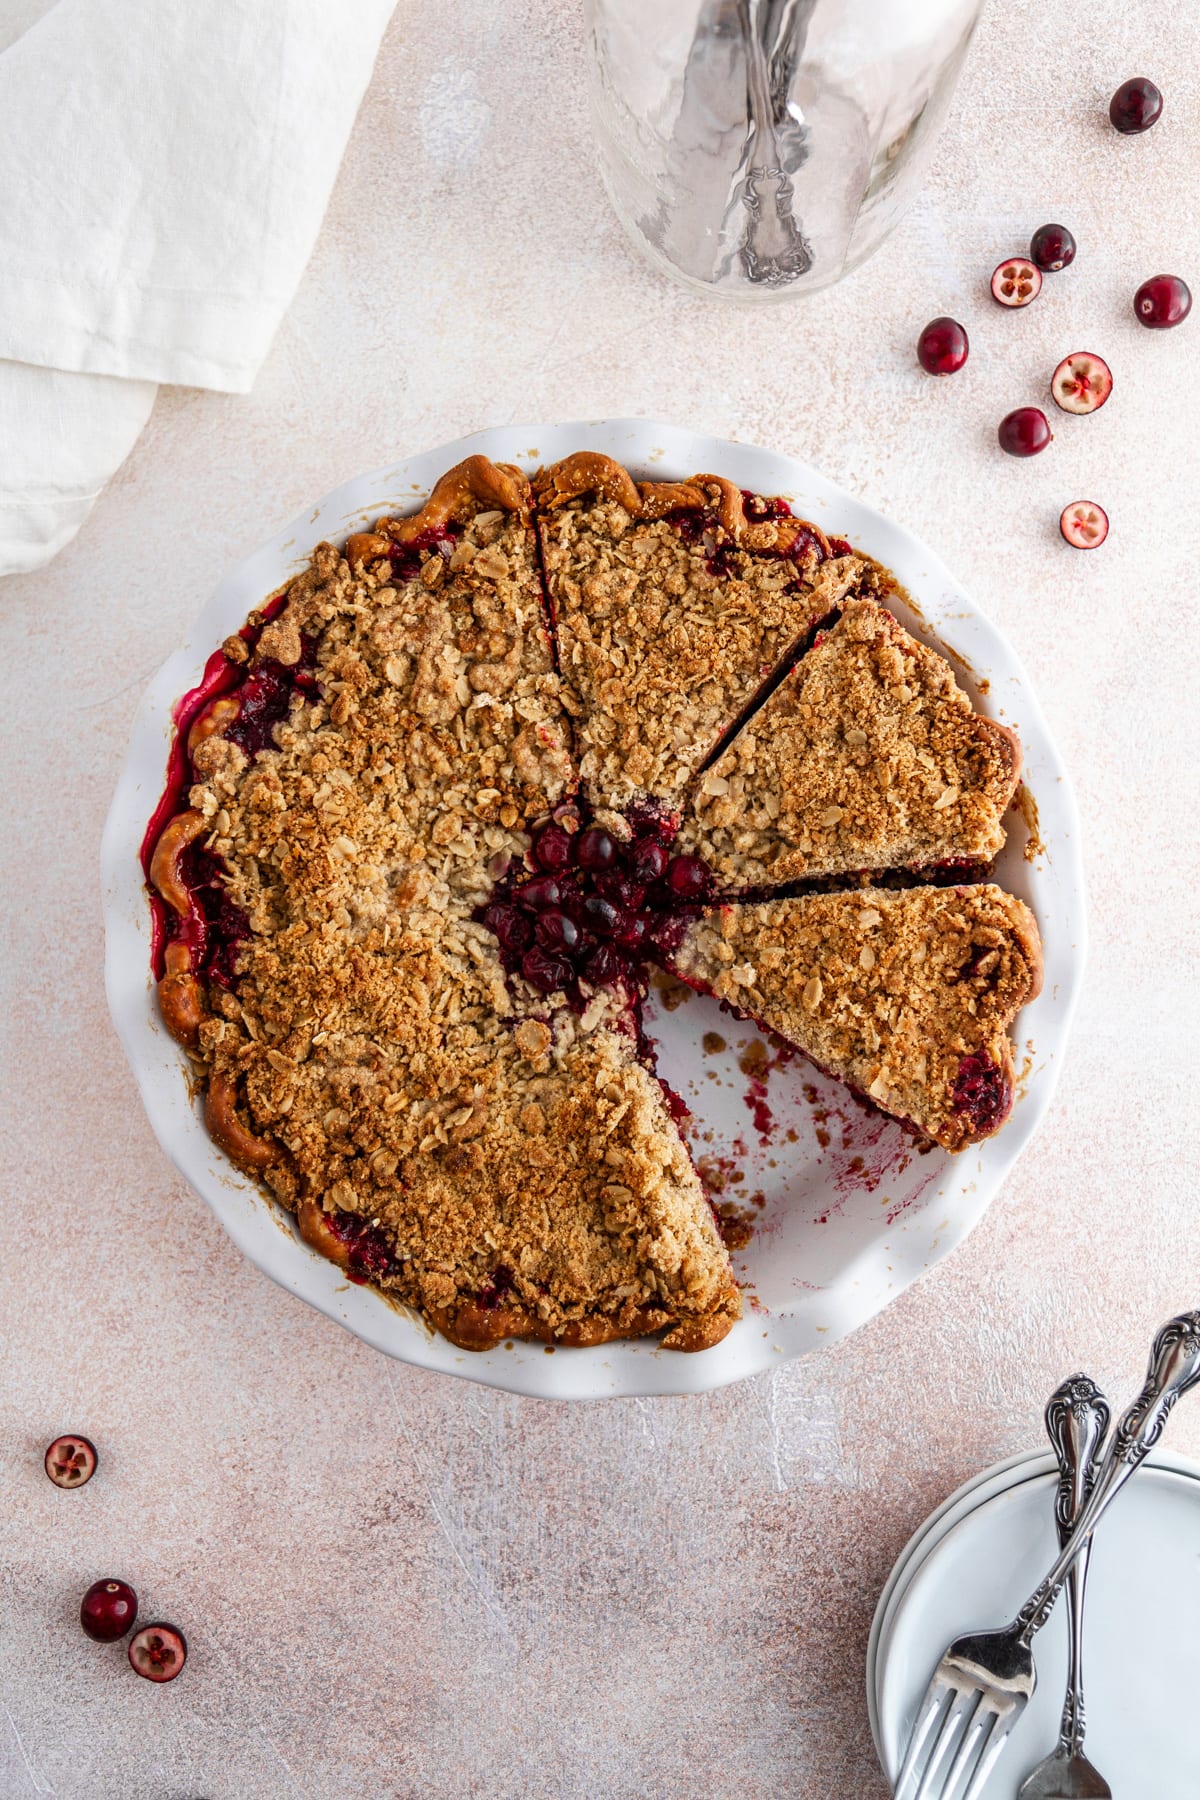 cranberry crumble pie on a surface with a slice taken out